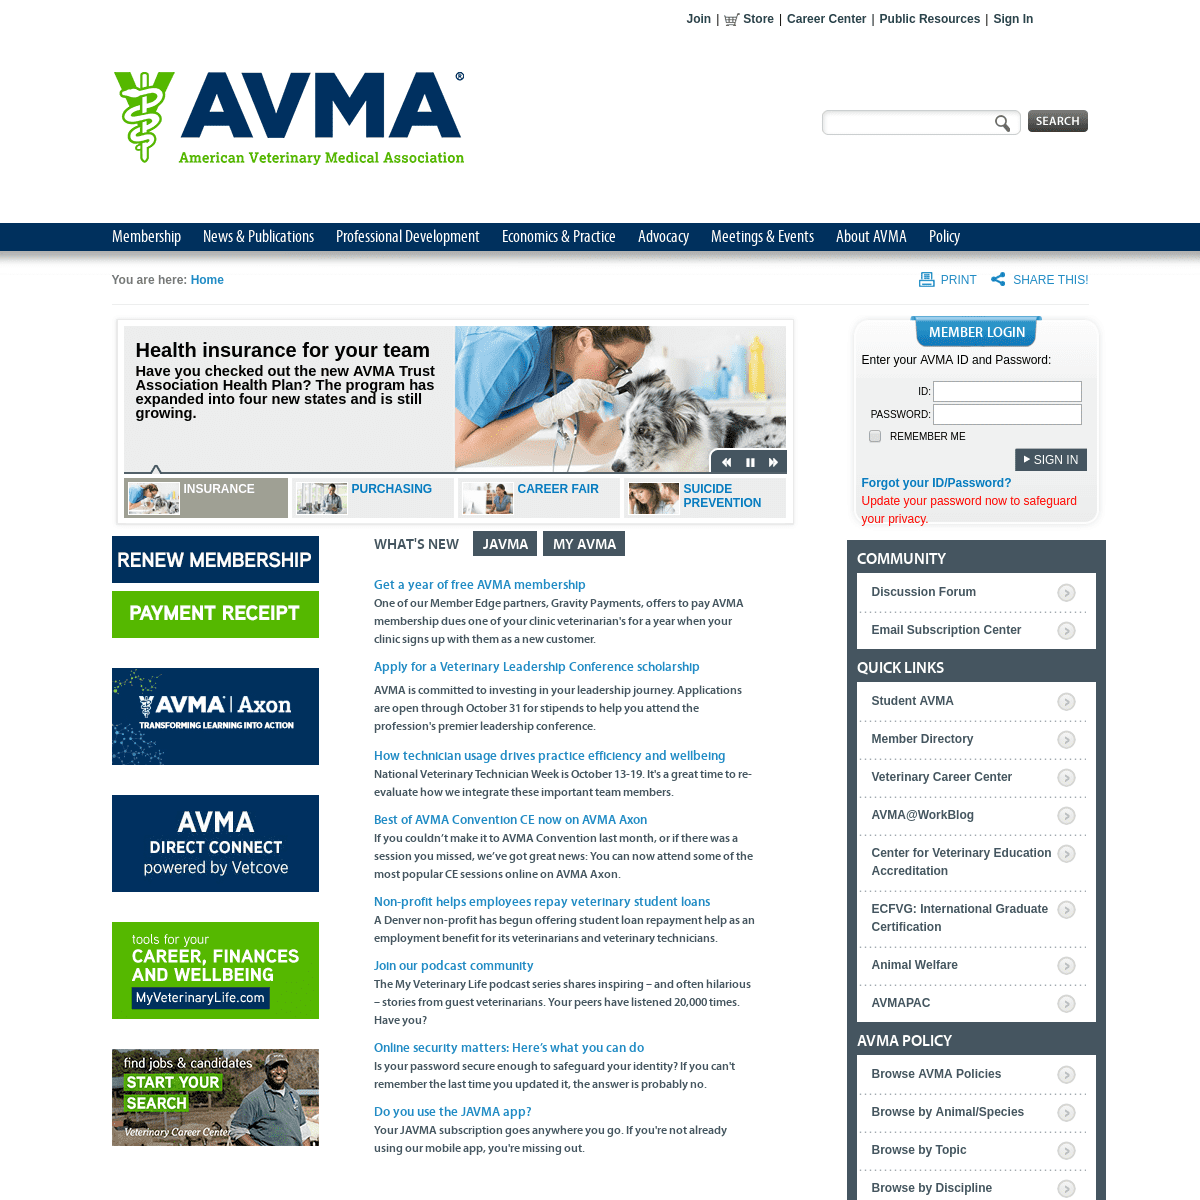 A complete backup of avma.org